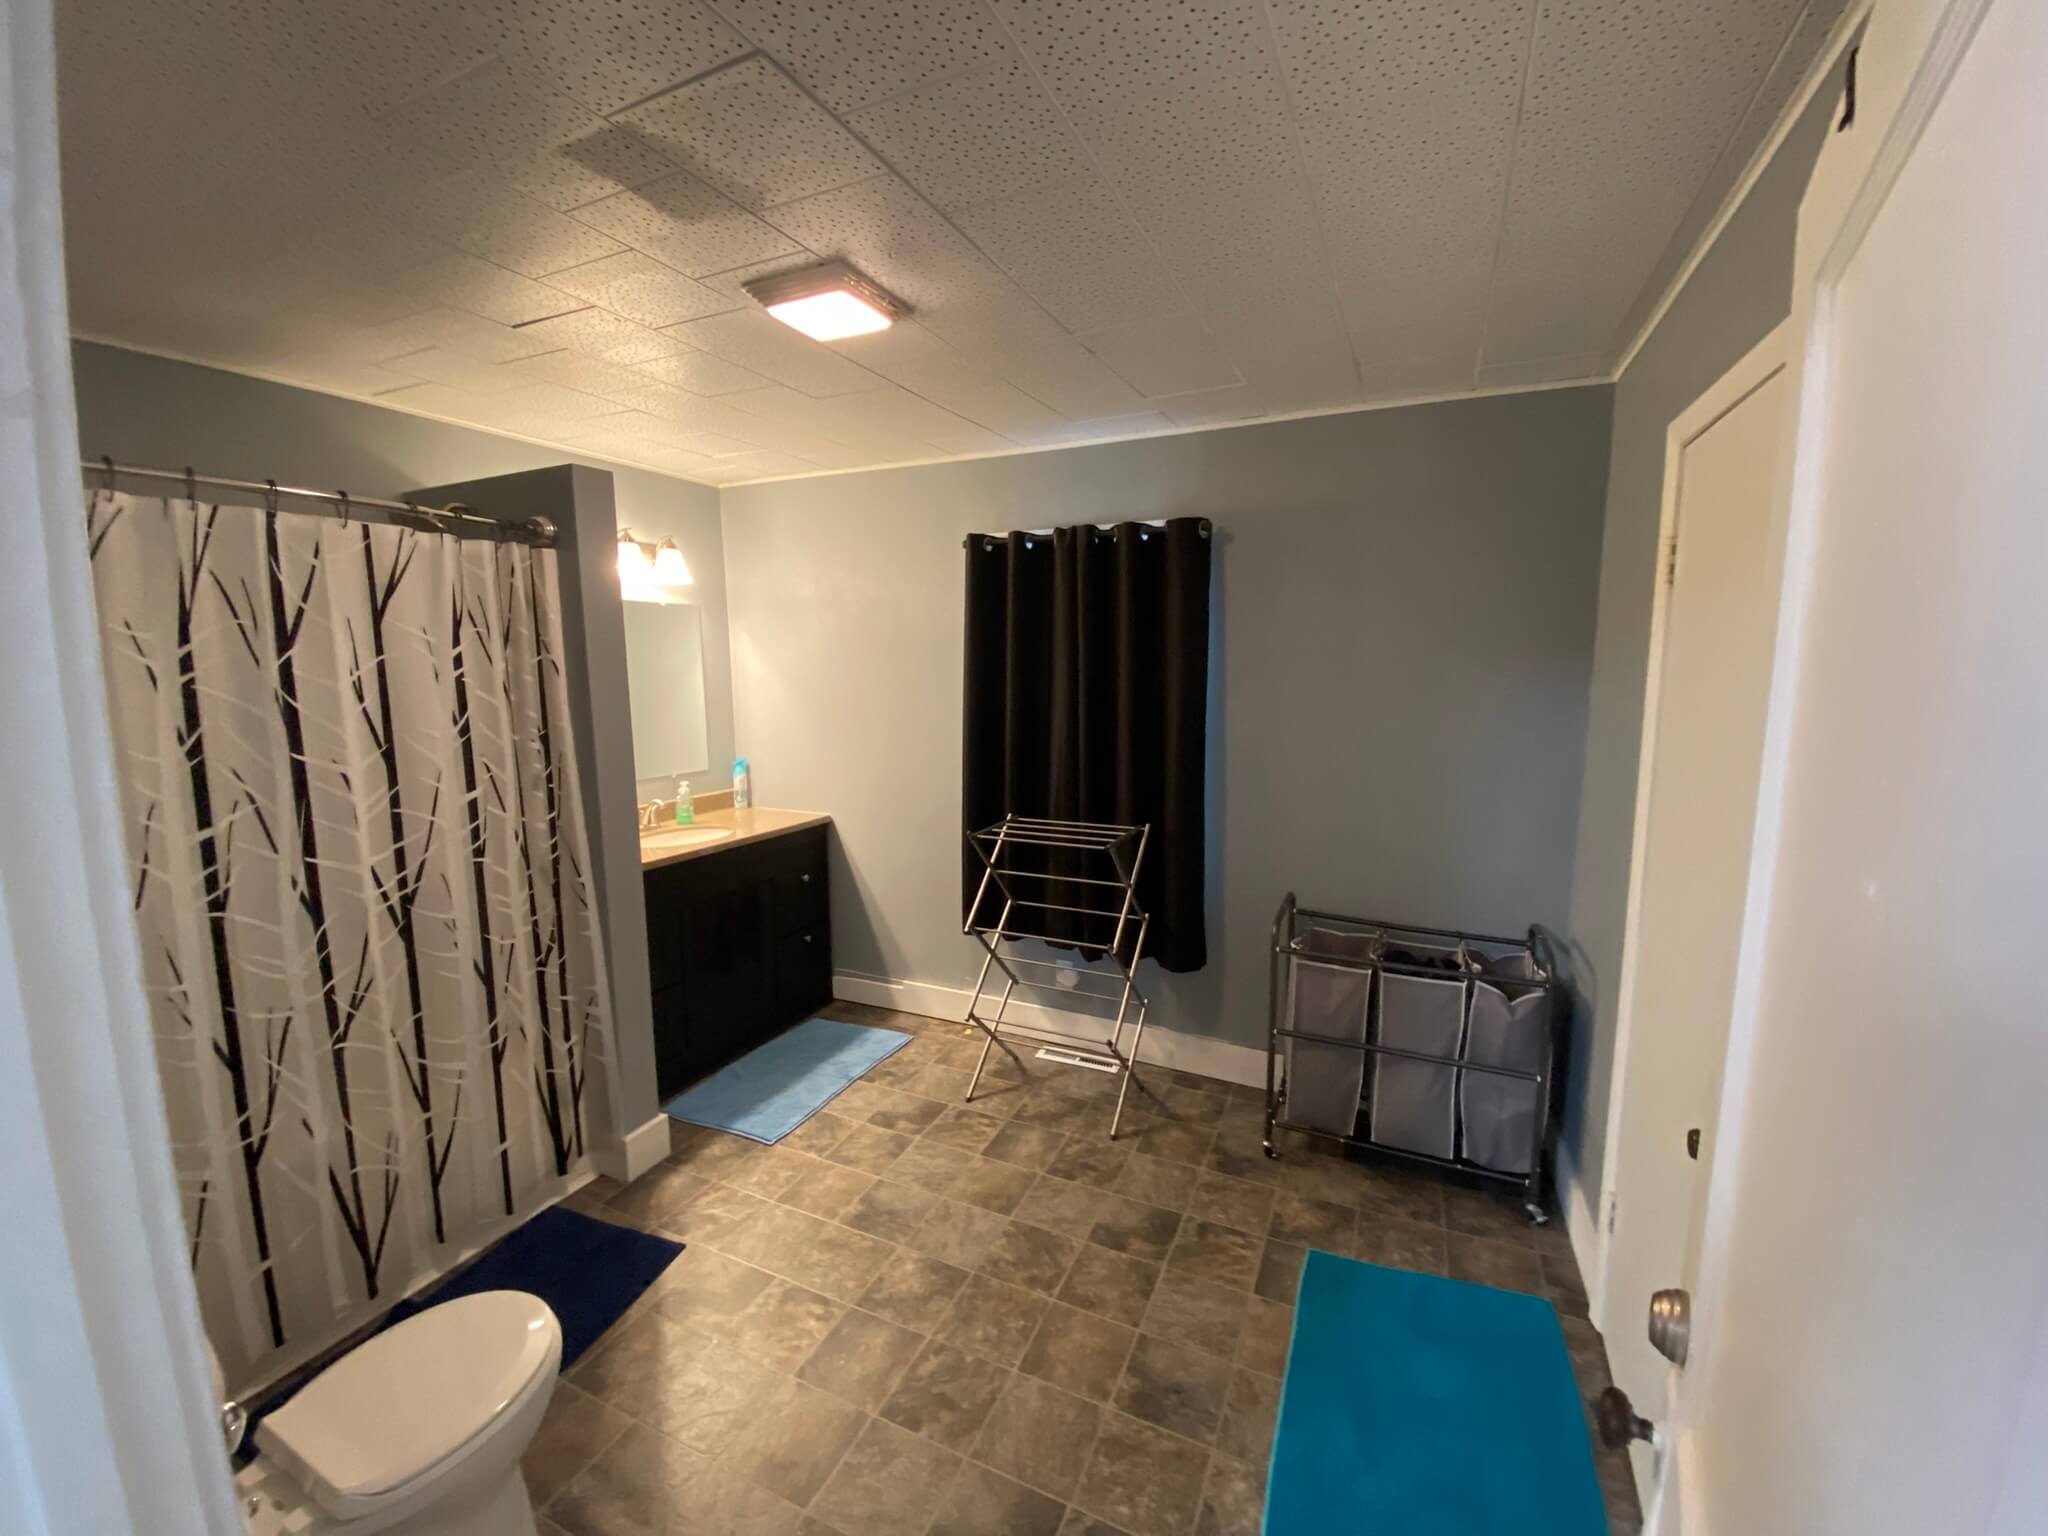 A large bathroom with a shower, sink, and toilet.